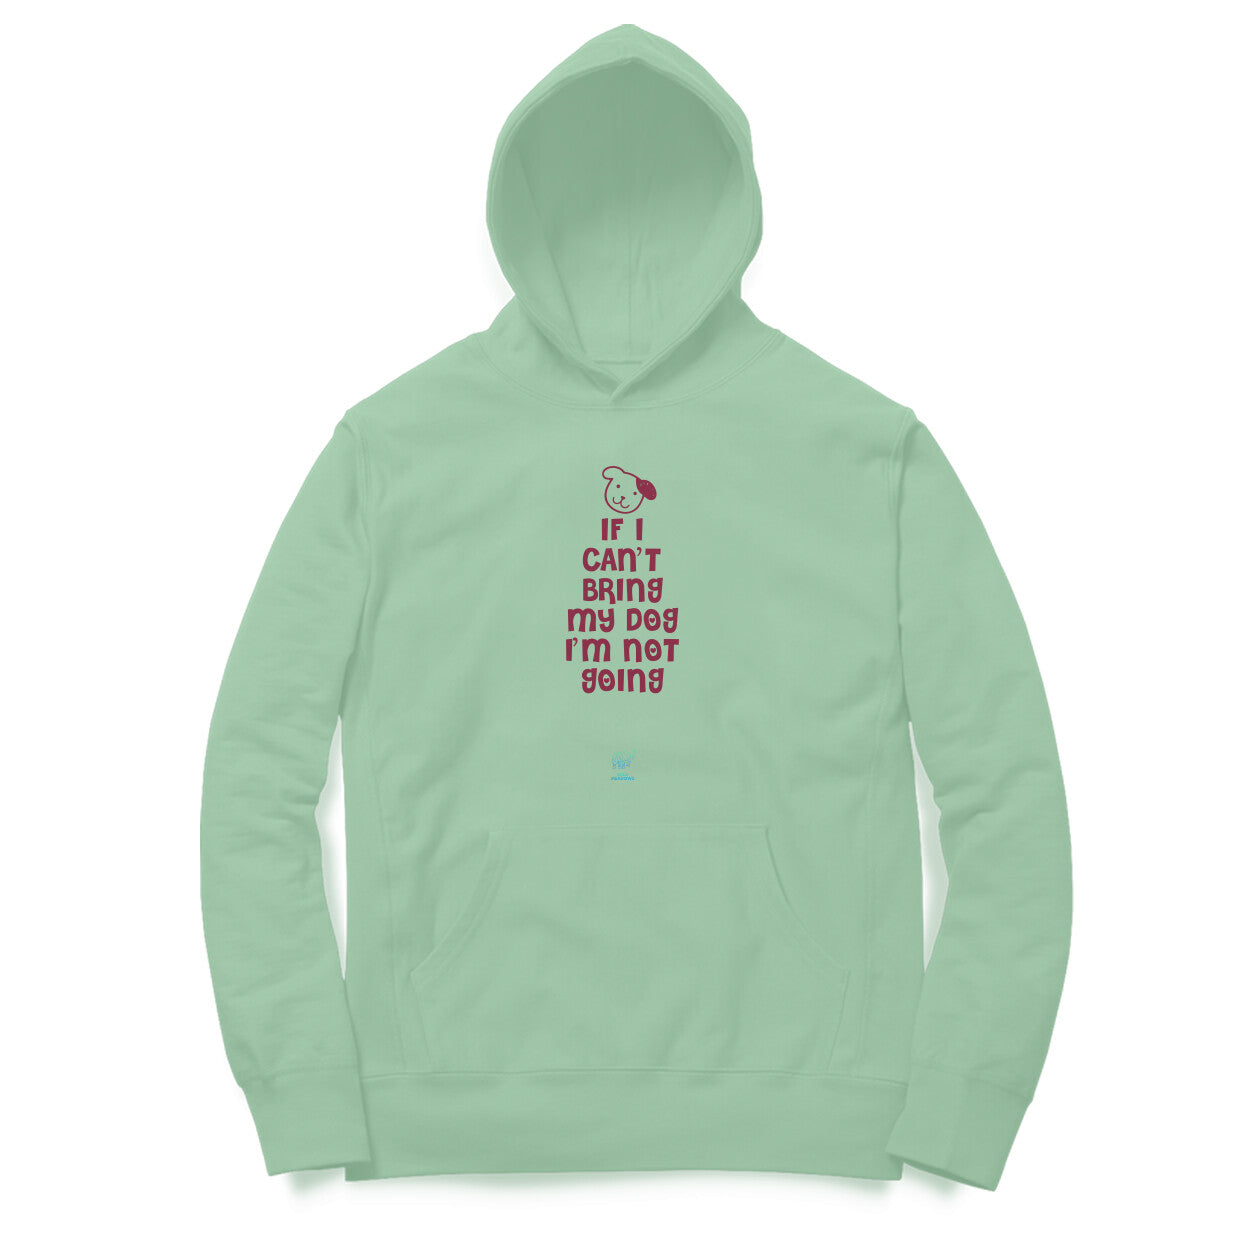 DOG - If I can't bring my dog, I'm not going - Unisex Hoodie